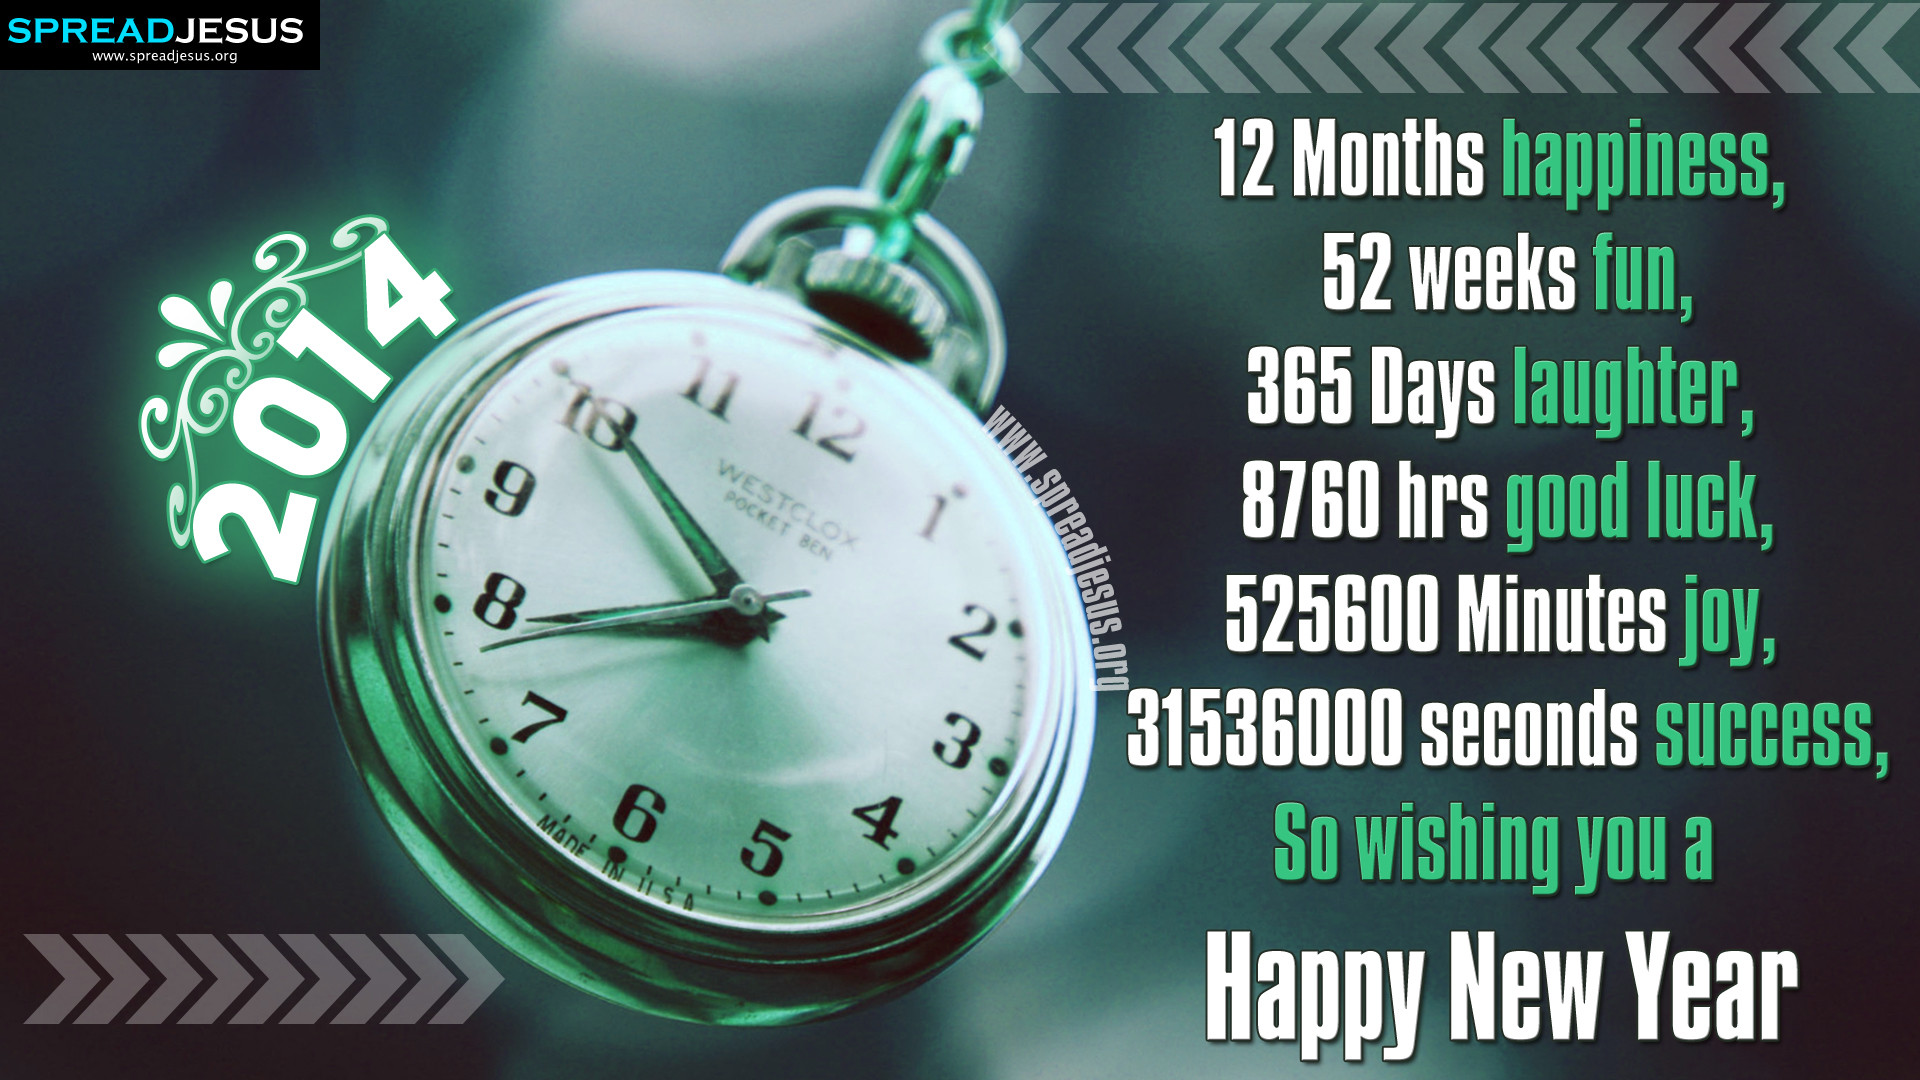 New Year 2014 Greetings Hd Wallpapers Wishing You A - 365 Days Of Happiness Happy New Year - HD Wallpaper 